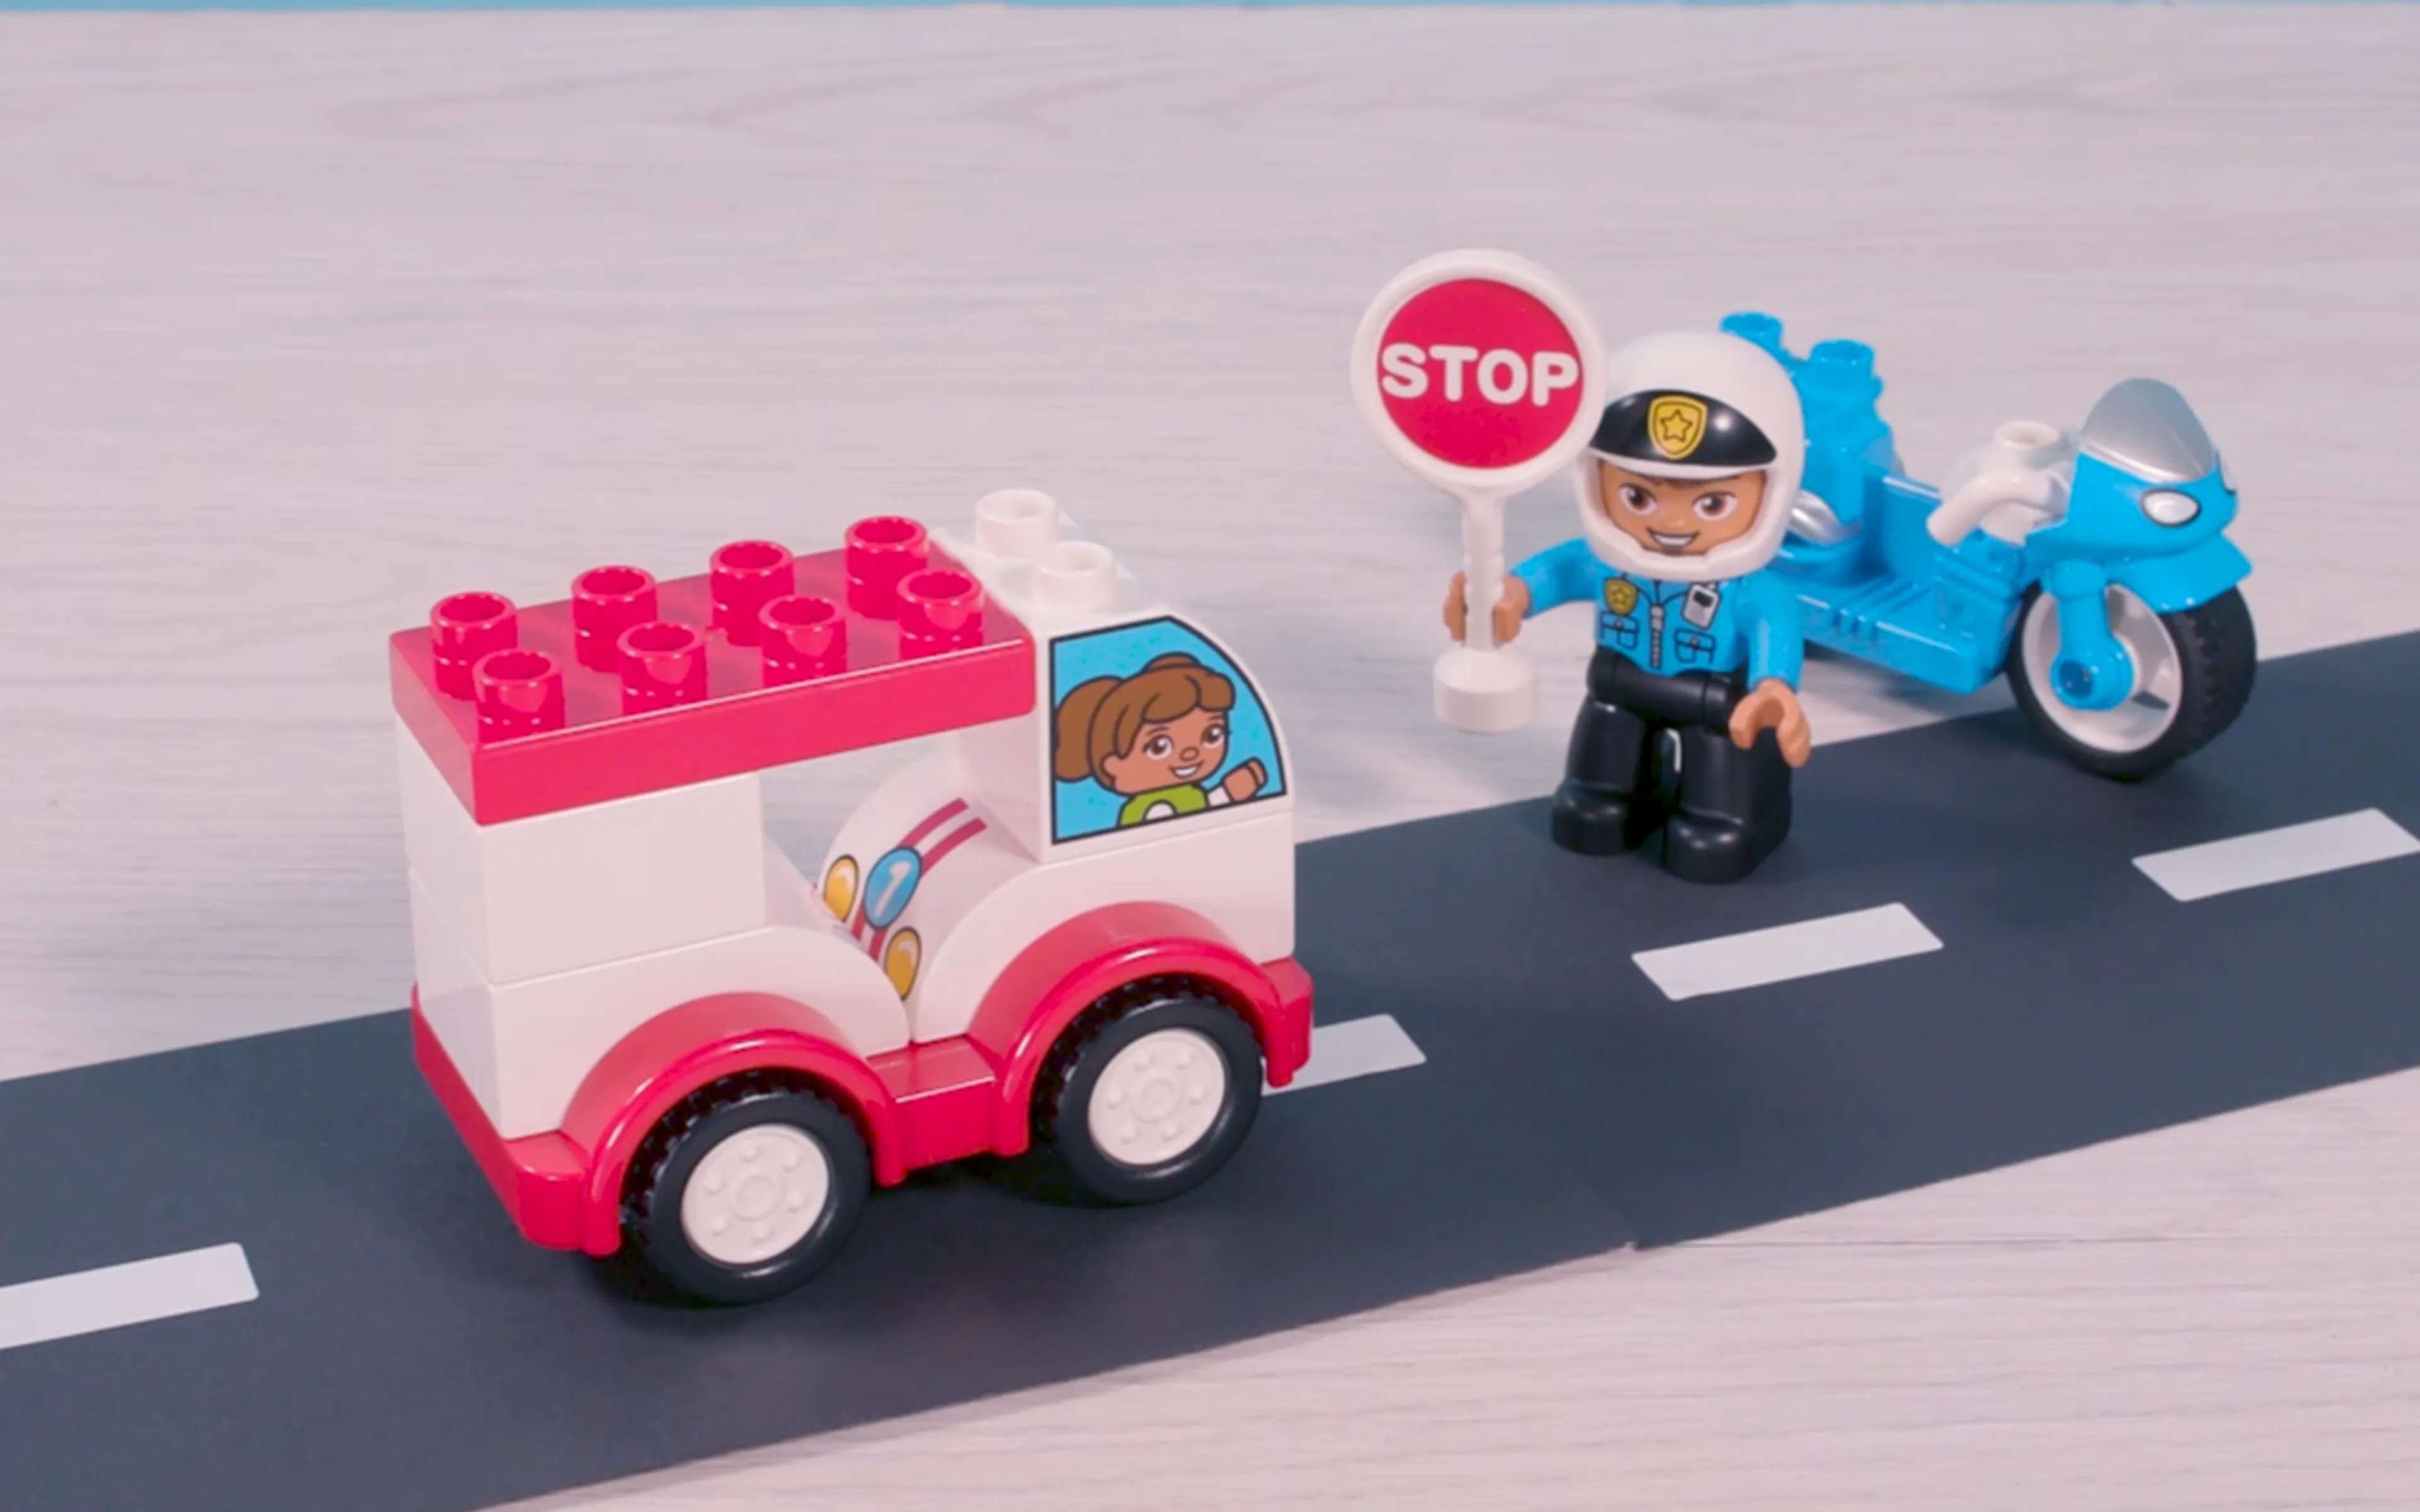 An image of a LEGO DUPLO police officer with a stop sign